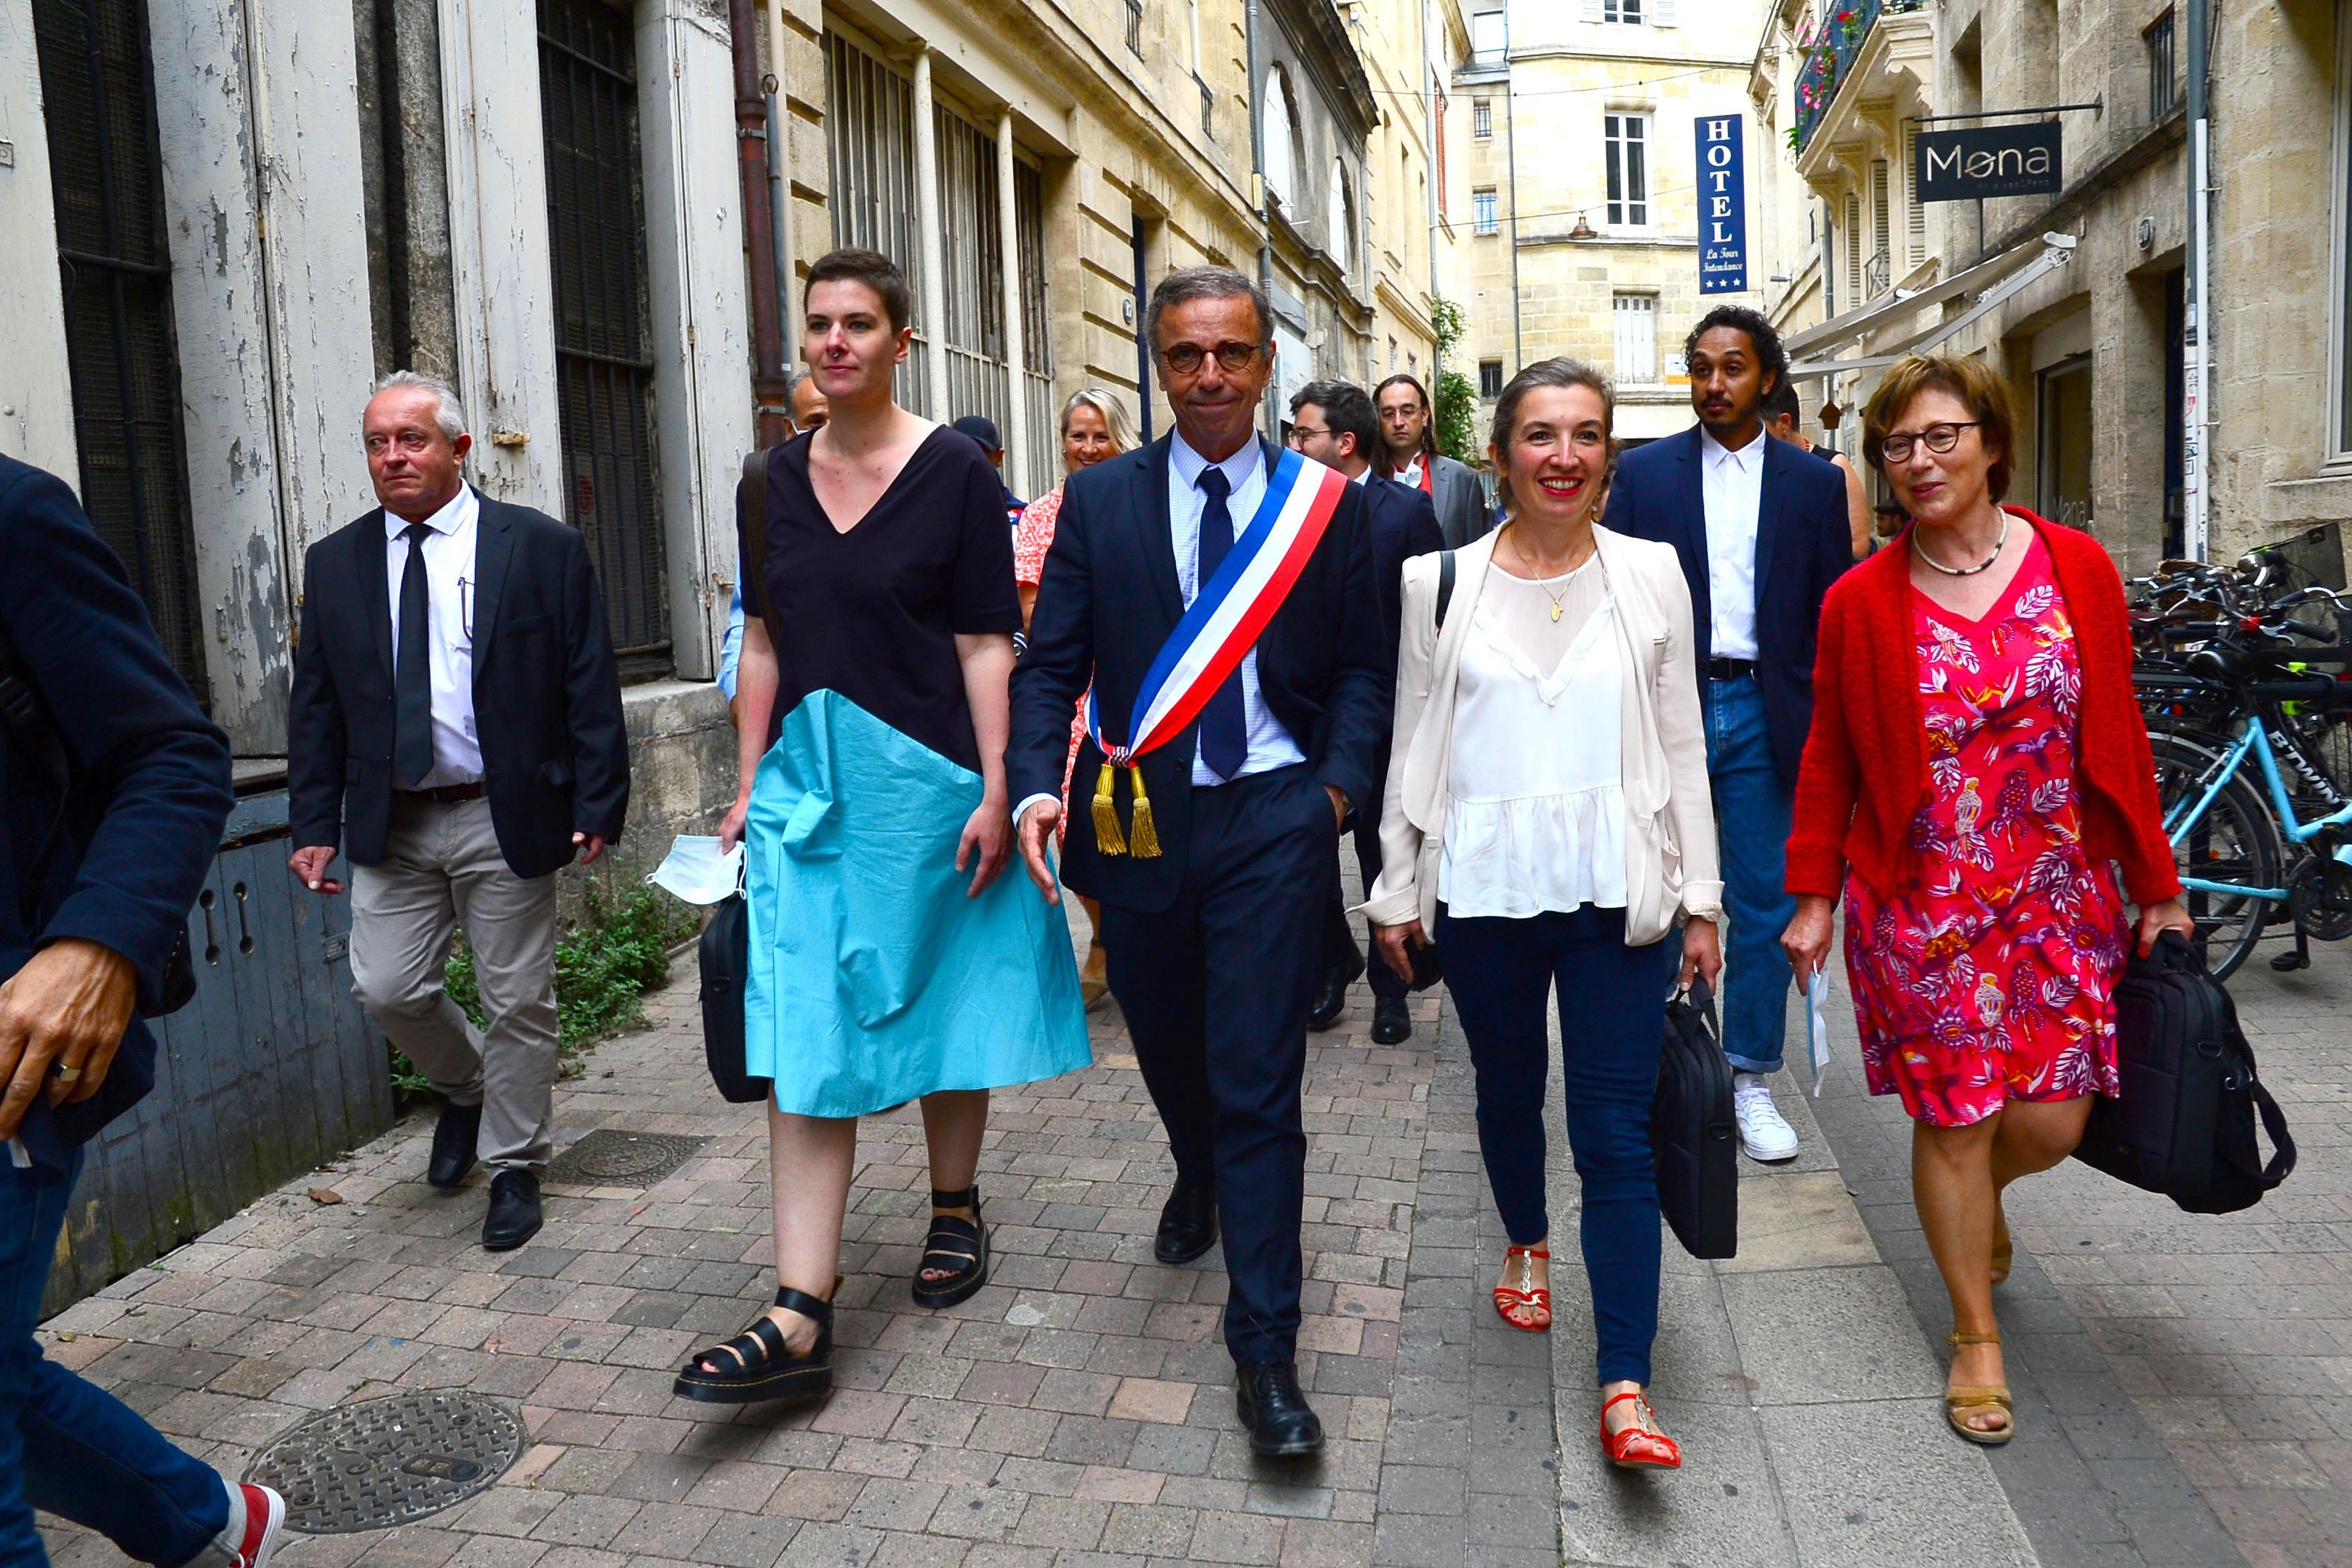 The new mayor of Bordeaux, wearing a sash, walks down the street flanked by advisers.